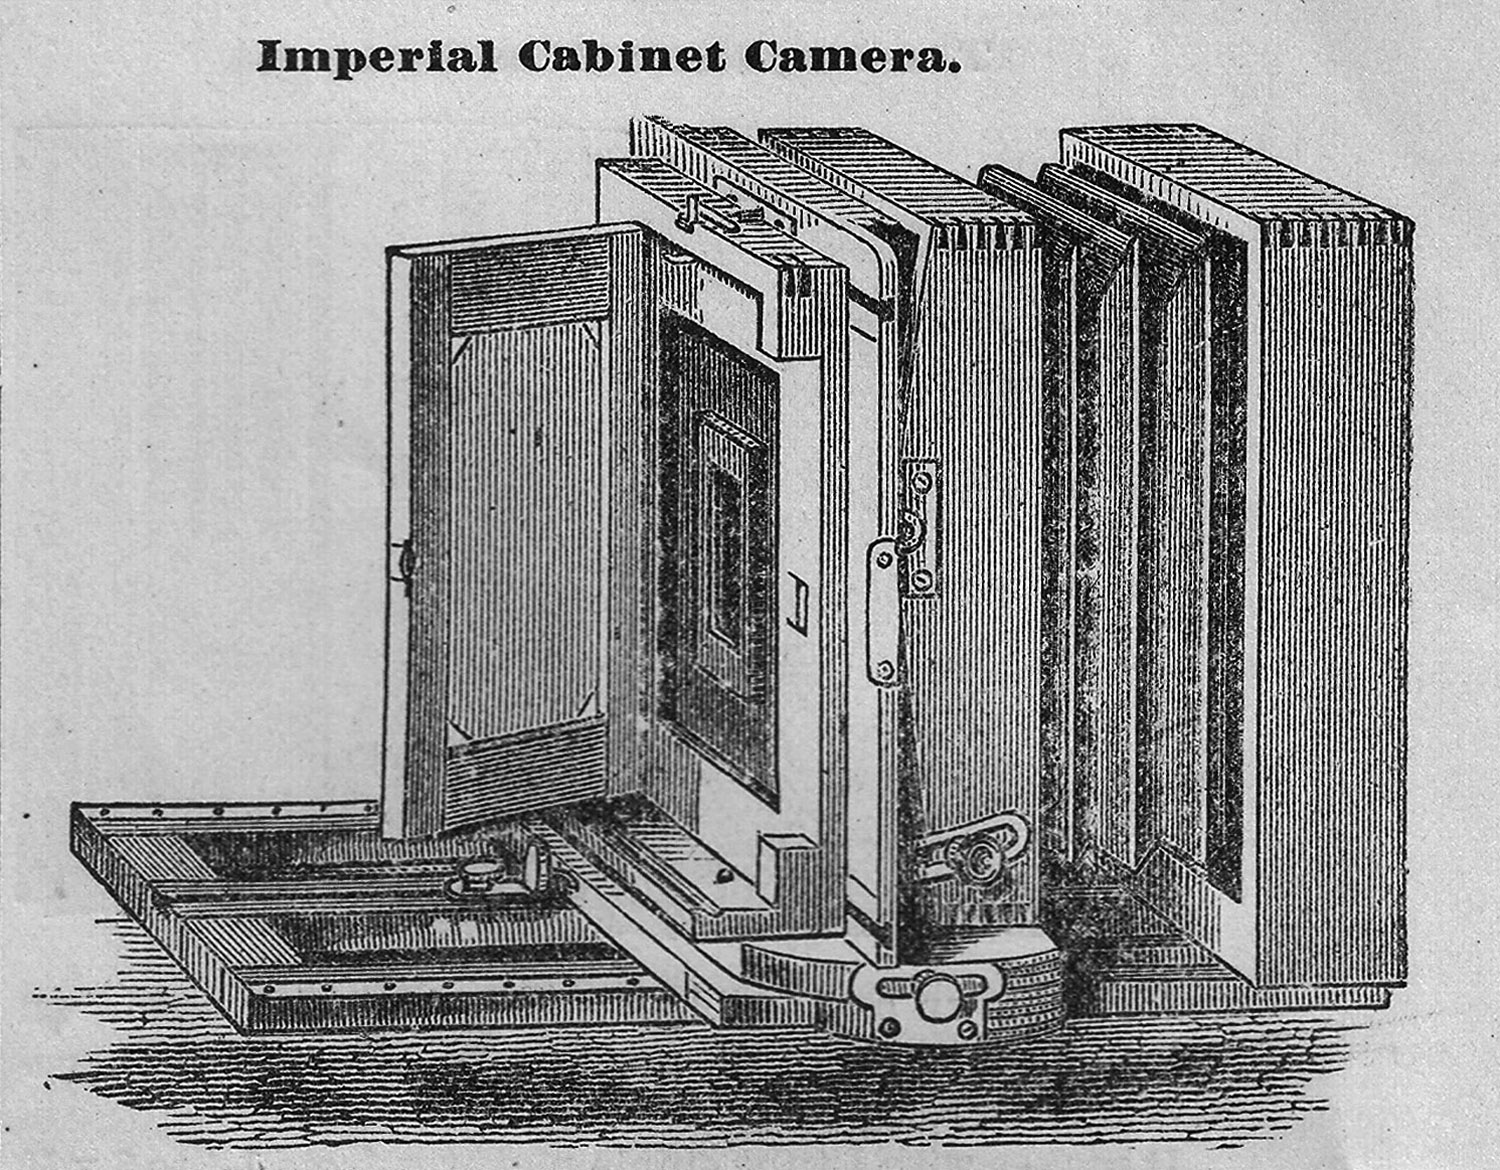 Imperial.Cabinet.Camera-Walzl.Photographers.Friend.7th,p.47,1882-camera.only-1500.jpg